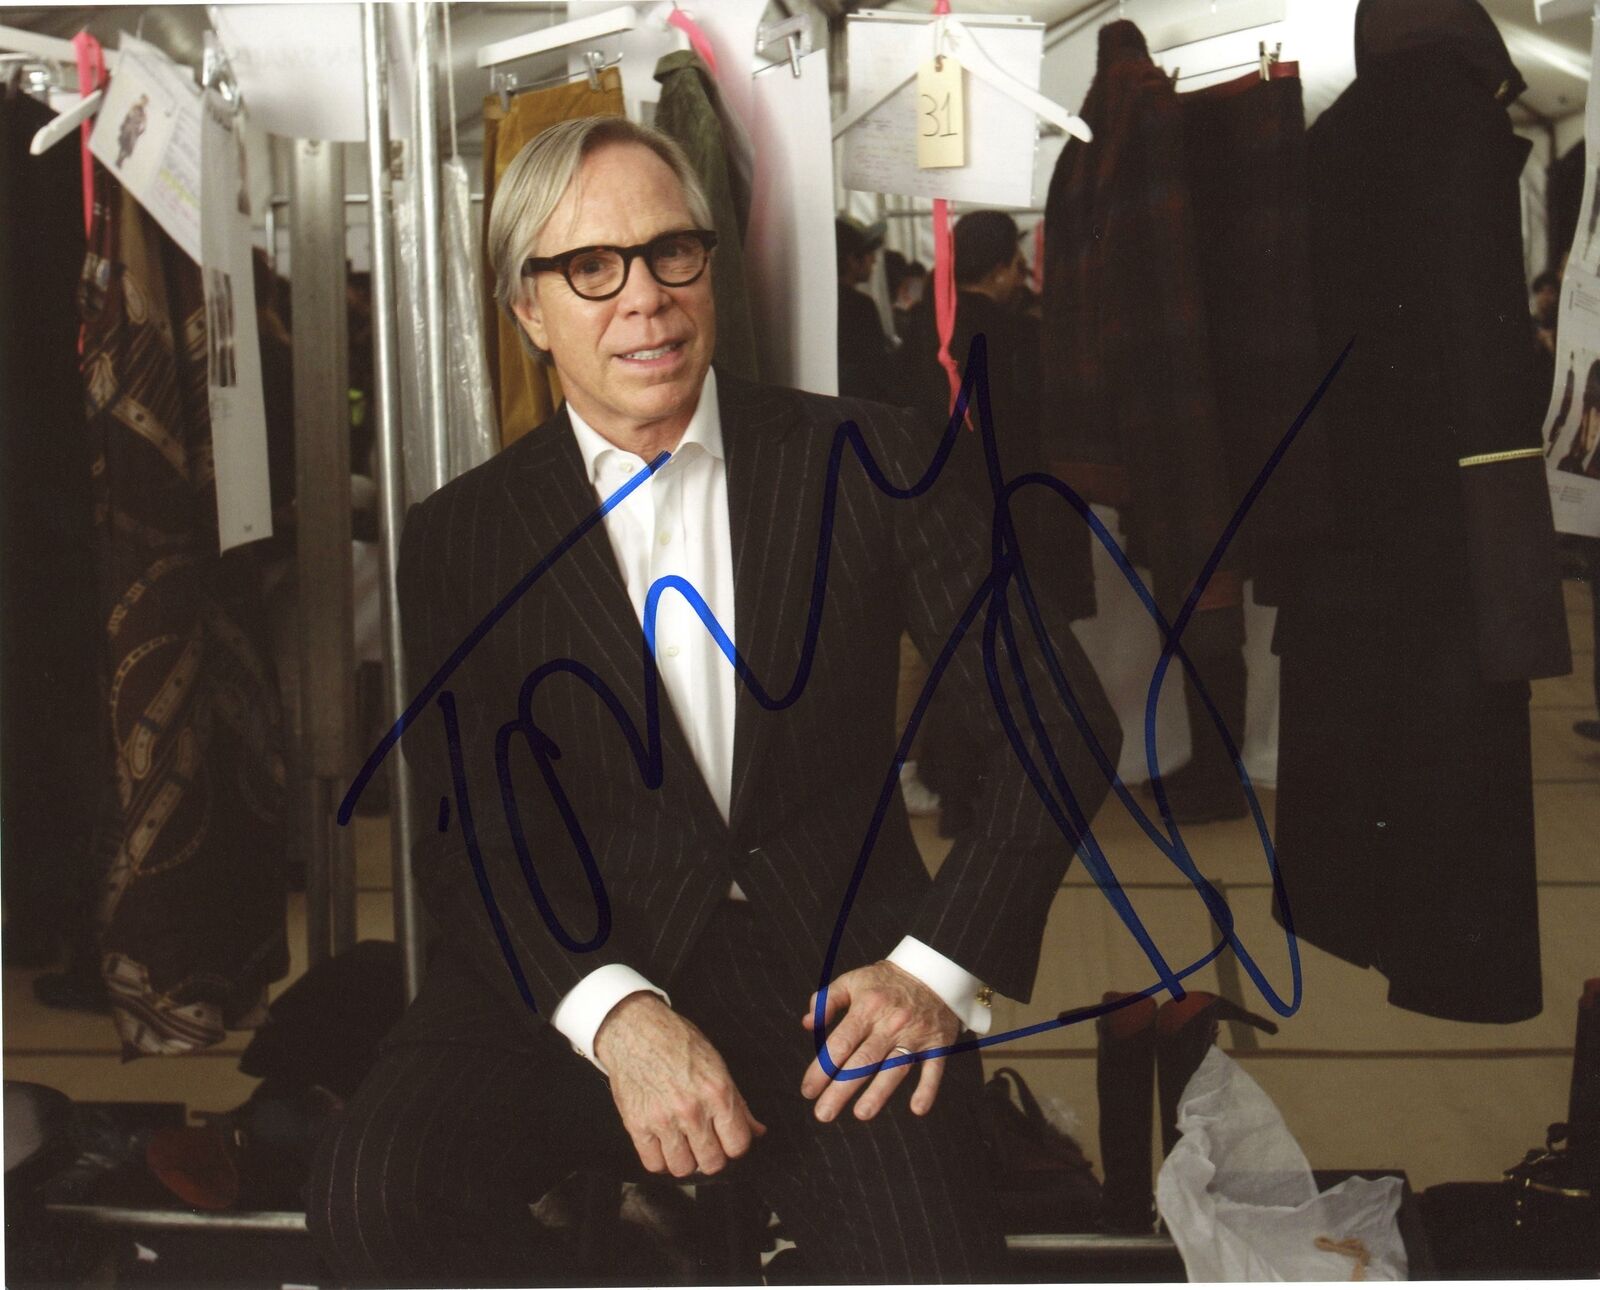 Tommy Hilfiger AUTOGRAPH Signed 8x10 Photo B ACOA Collectible ...